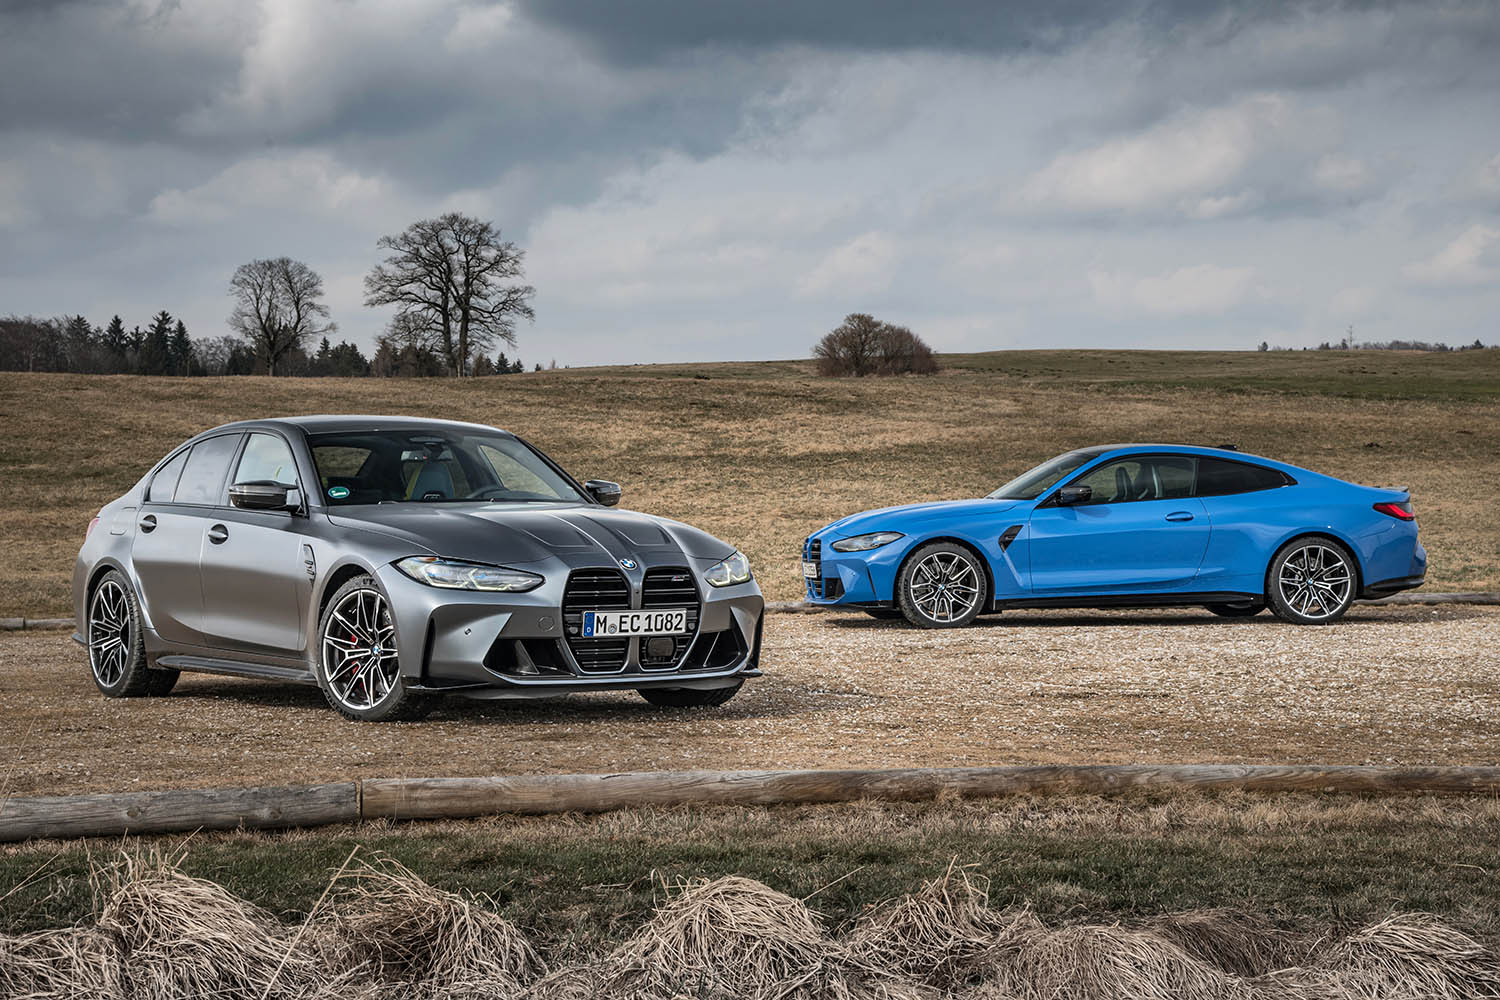 BMW M3 Sedan in gray and a BMW M4 Coupe in blue parked in an open field